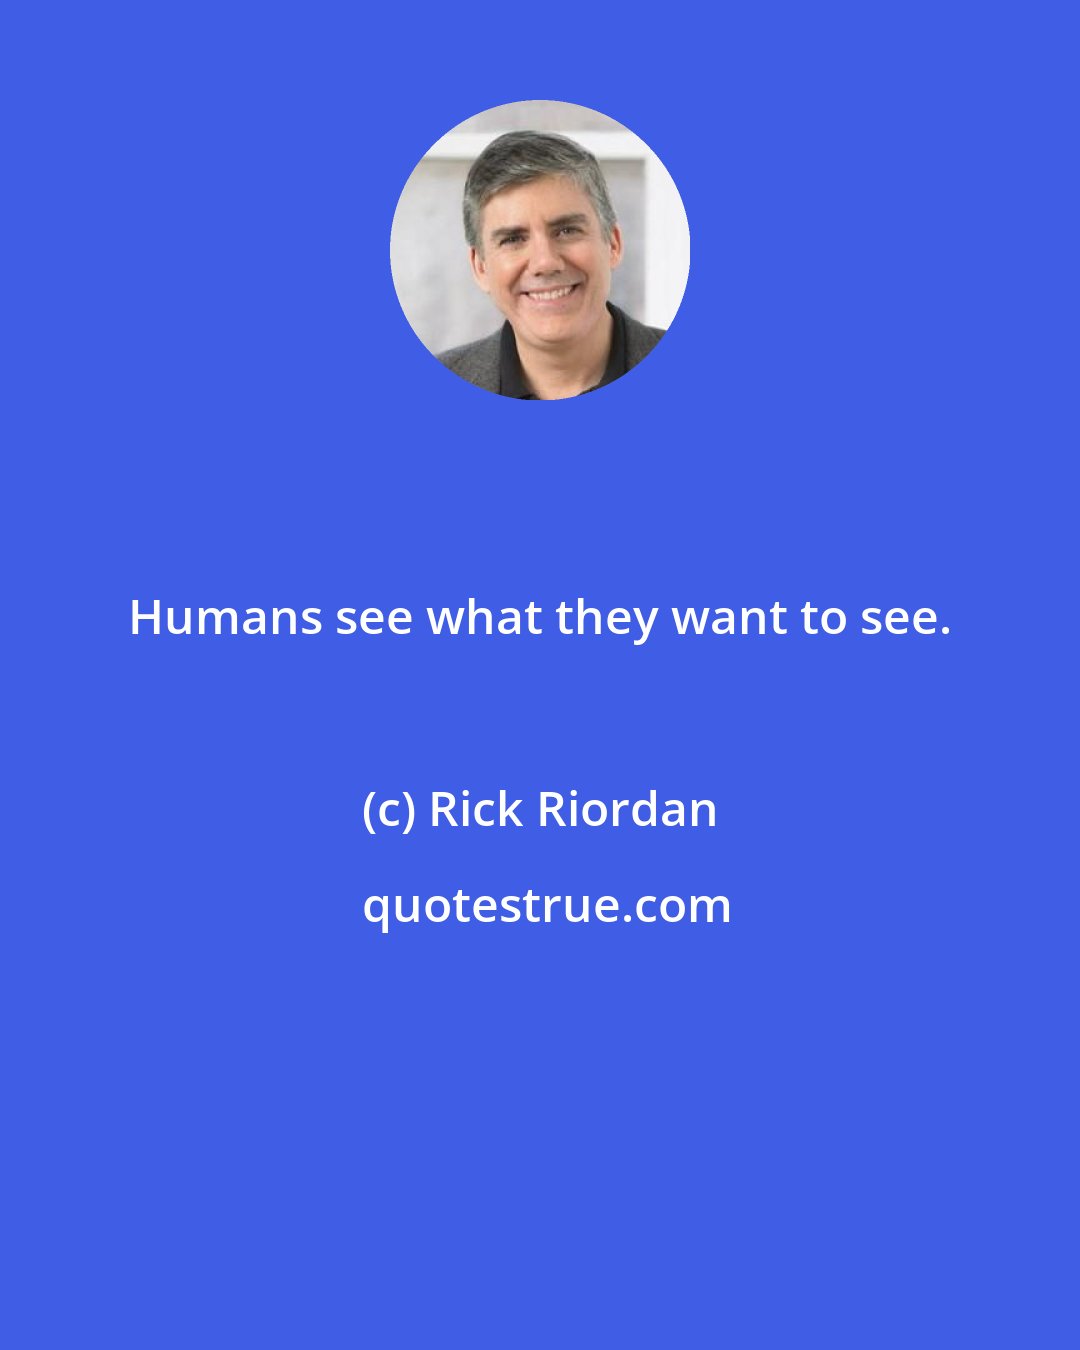 Rick Riordan: Humans see what they want to see.